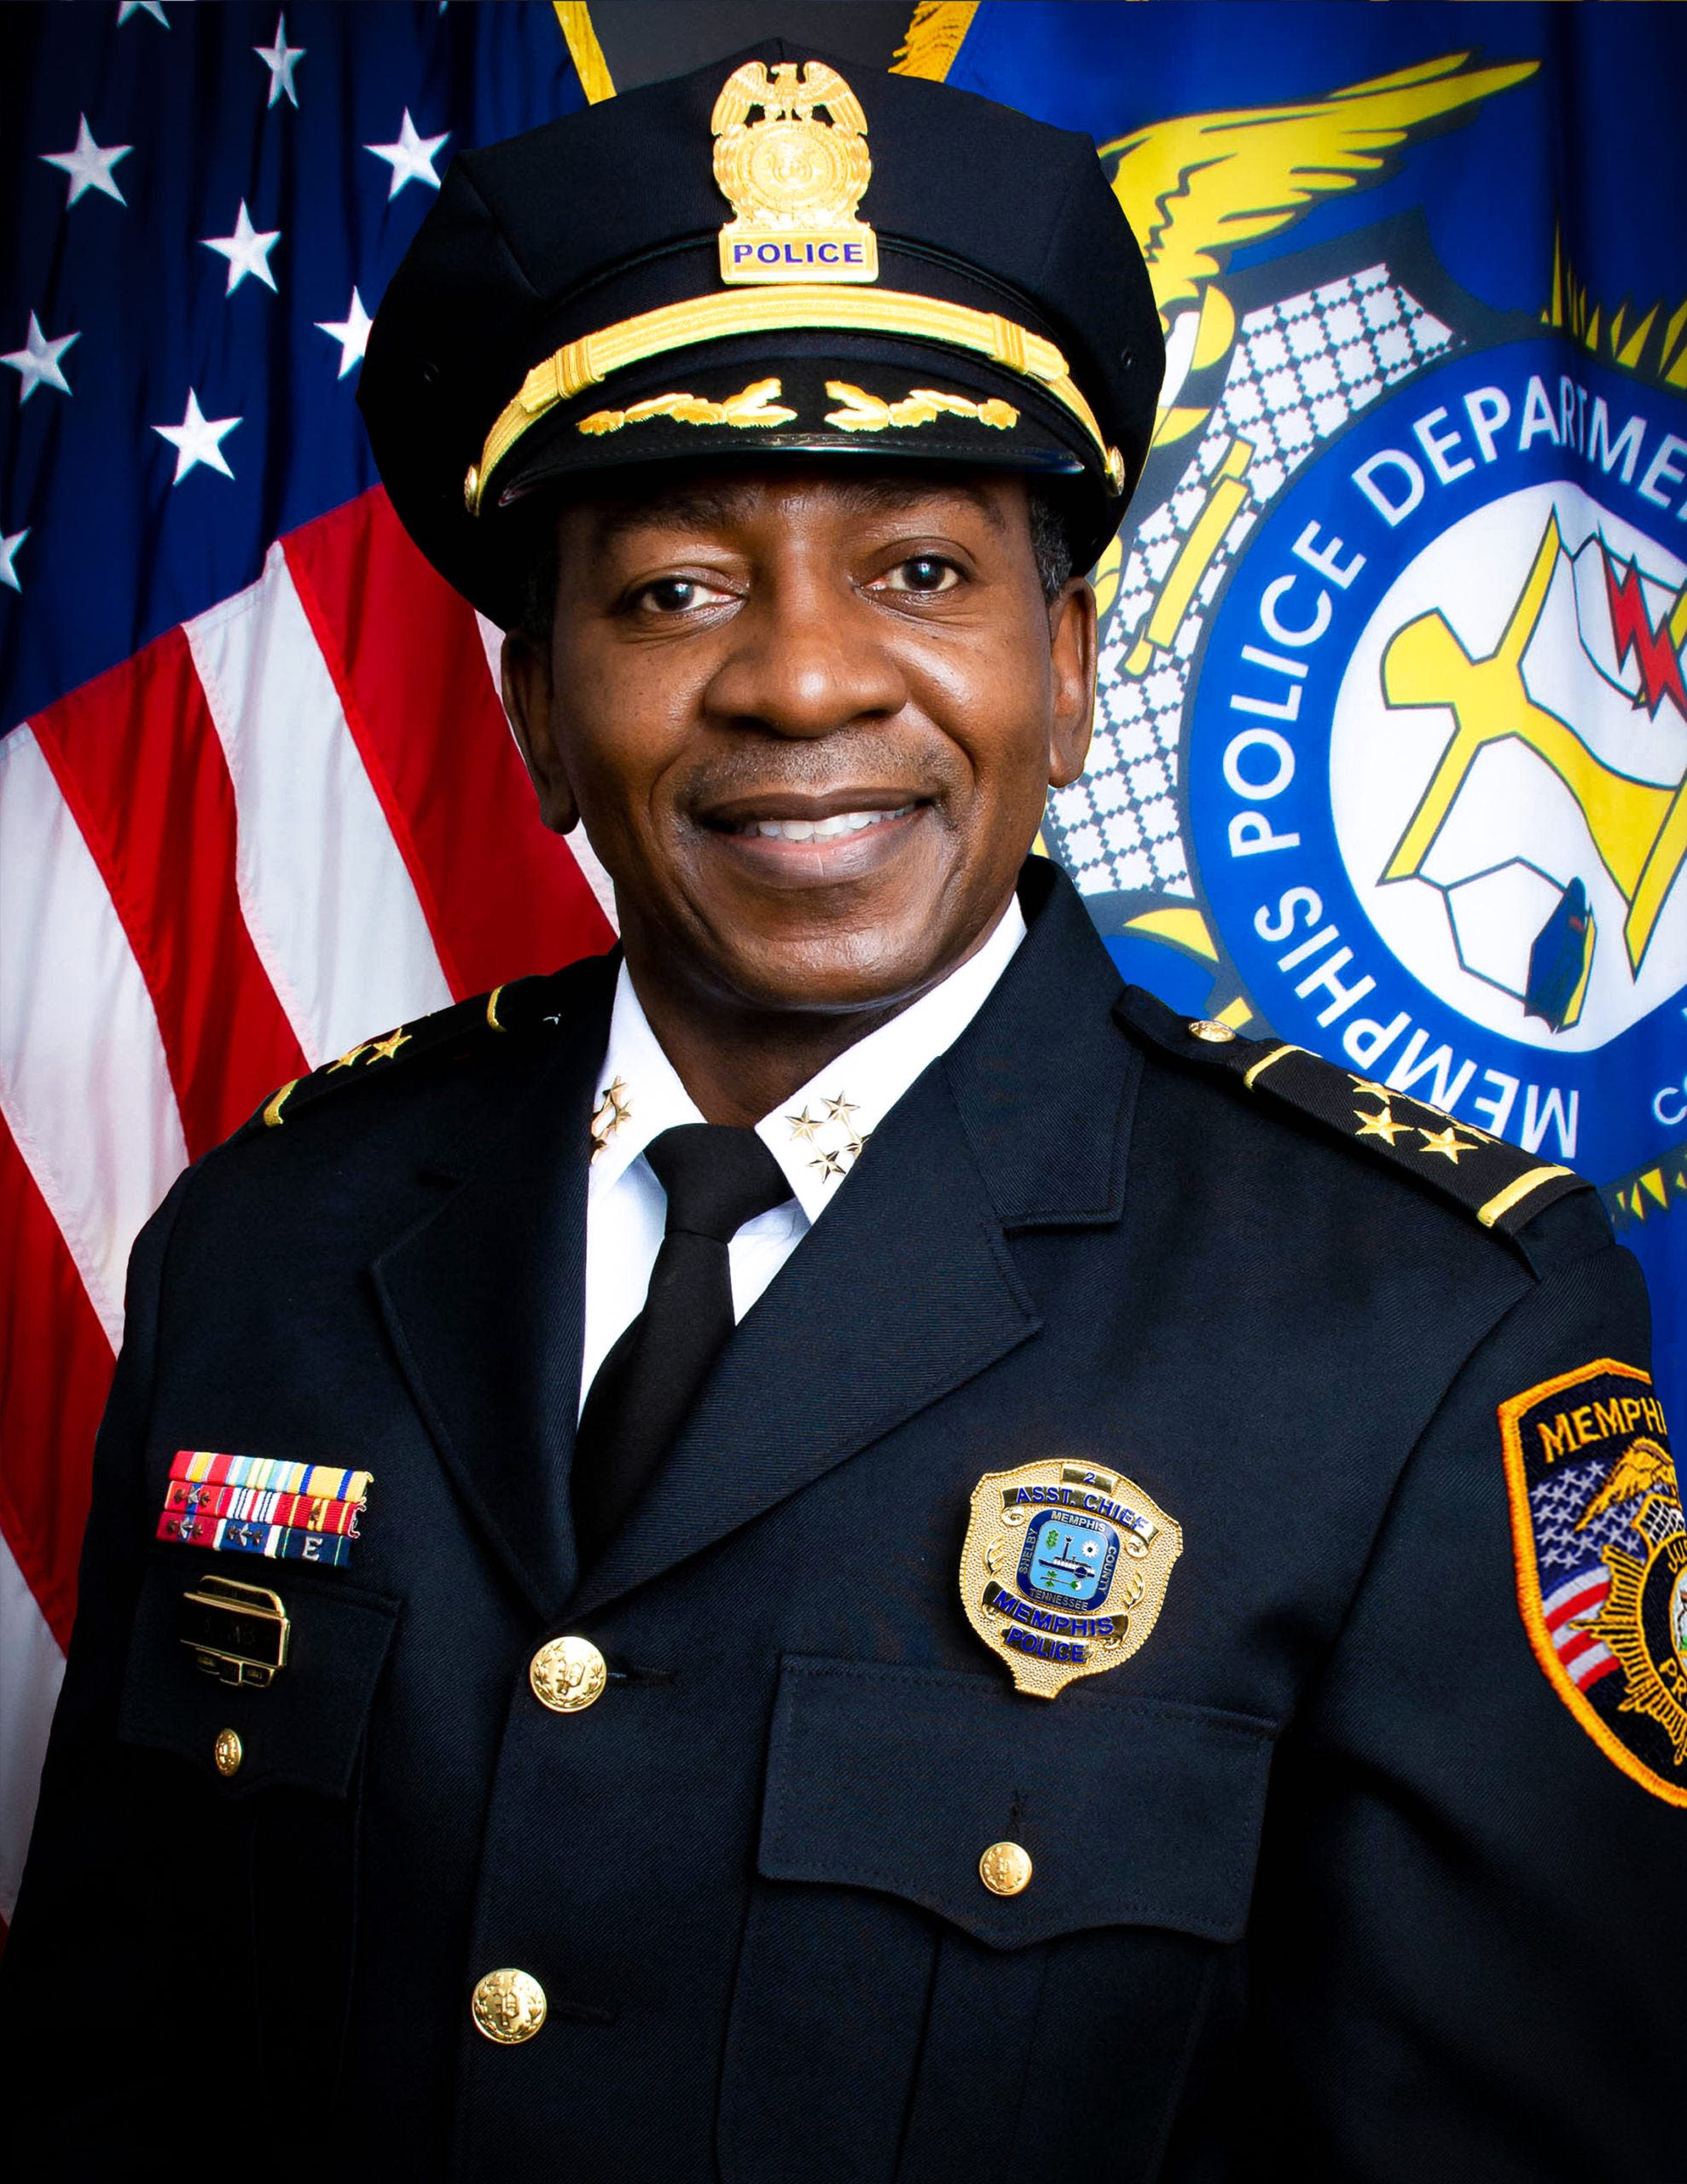 Memphis Police Department Assistant Chief Shawn Jones no longer with MPD, Mayor Paul Young says